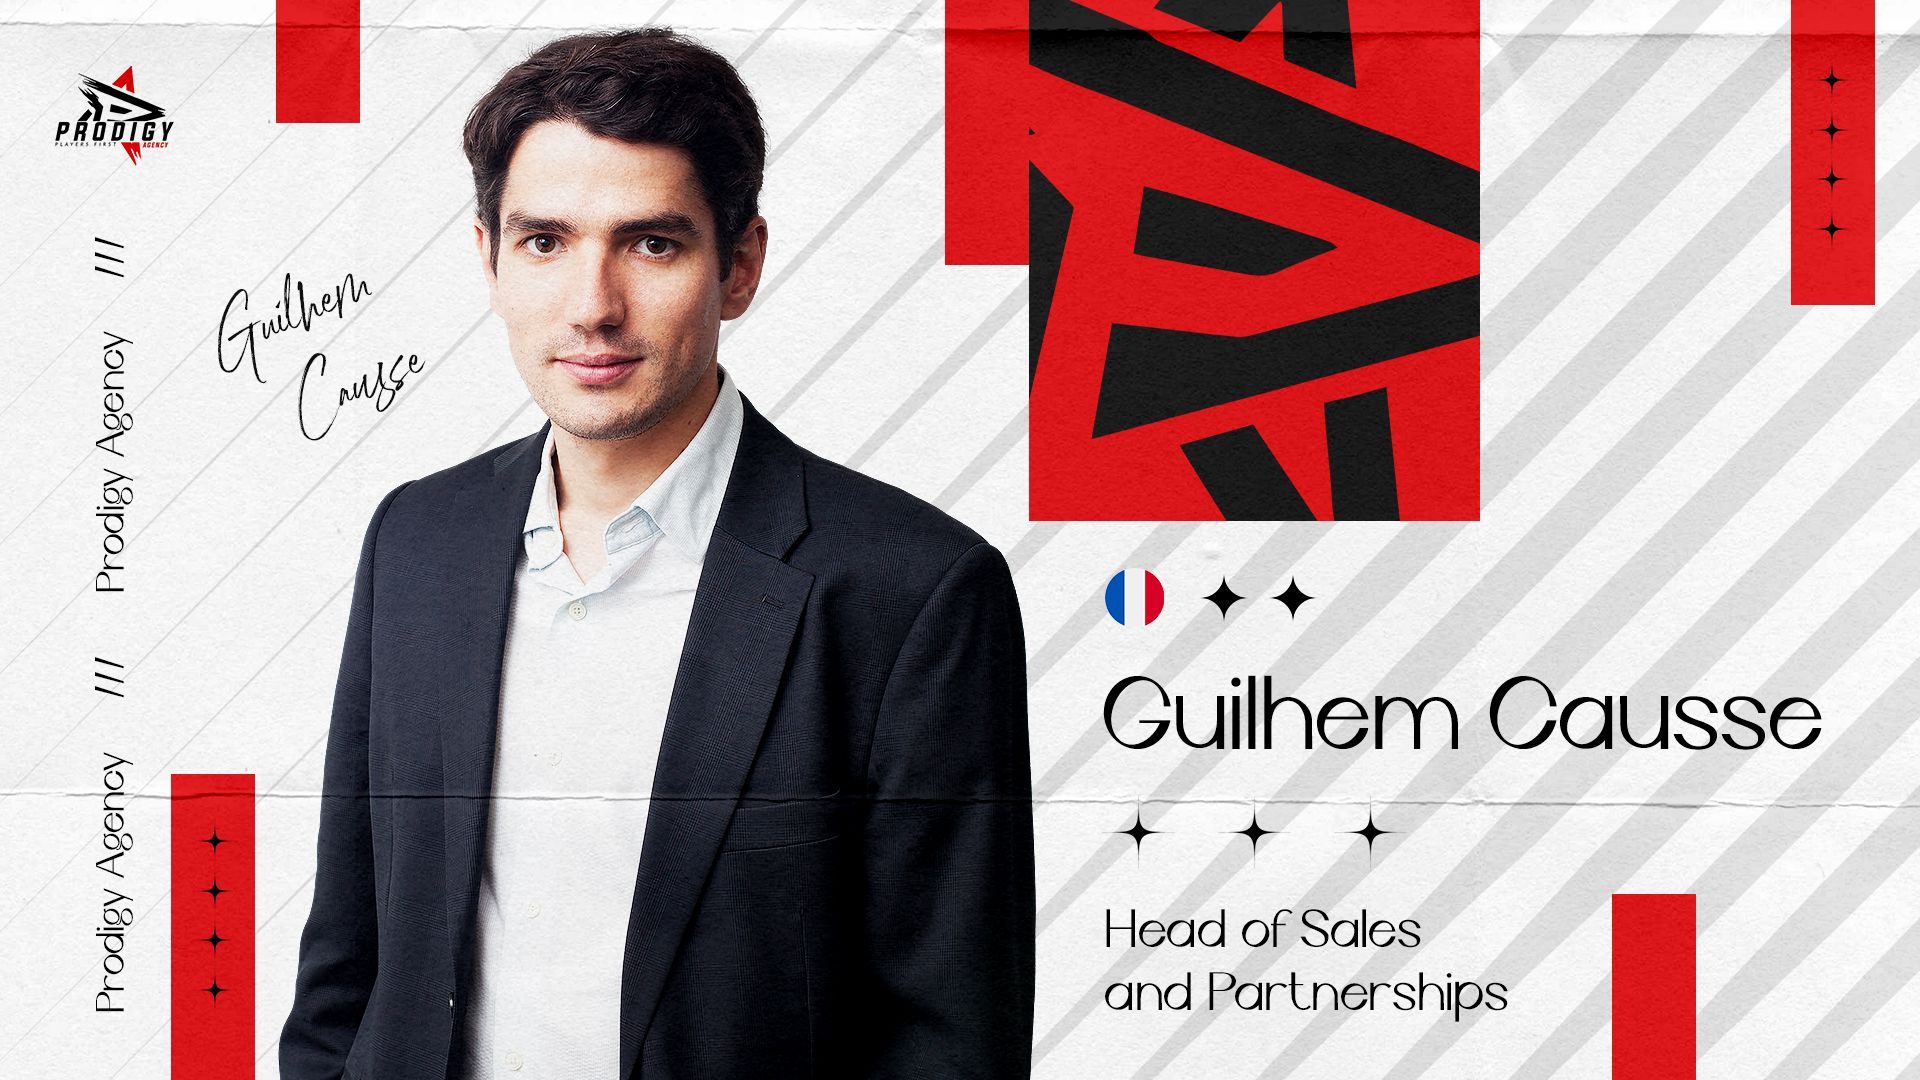 Guilhem Causse (former Infront X & A.S.O.) joins Prodigy Agency as Head of Sales & Partnerships